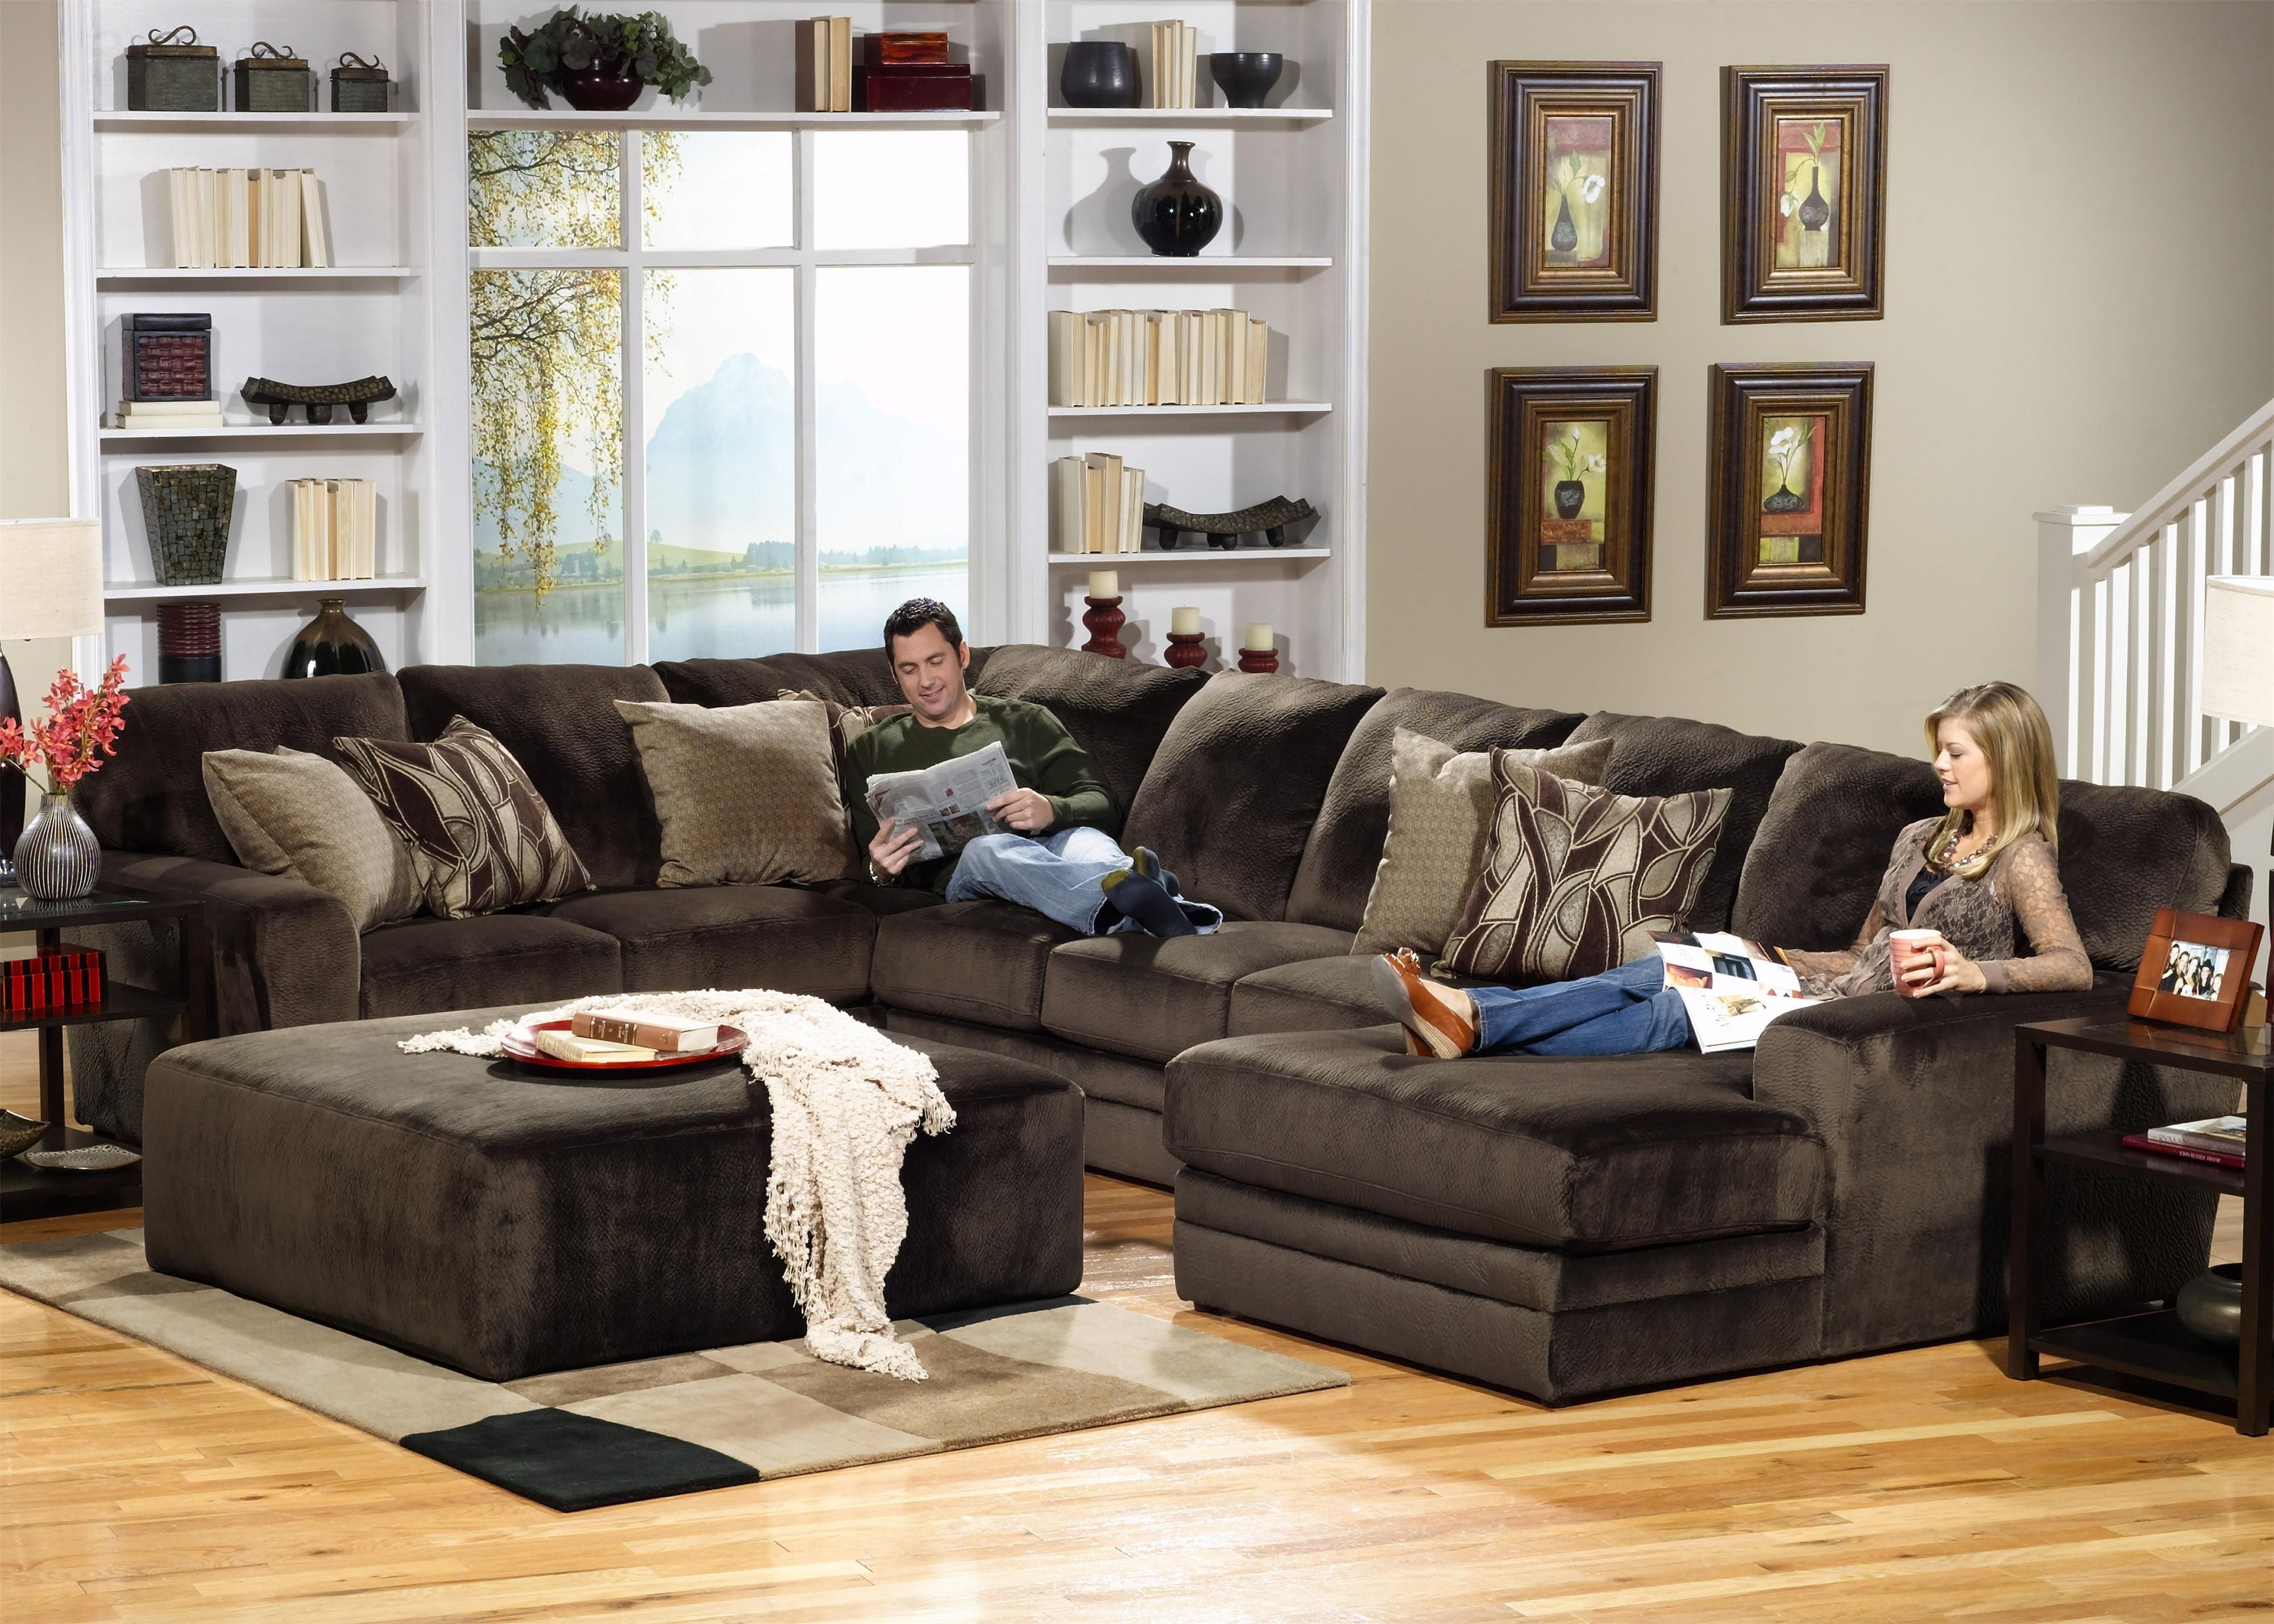 4377 Everest 3 Piece Sectional With Lsf Sectionjackson Furniture Regarding Dayton Ohio Sectional Sofas (View 4 of 10)